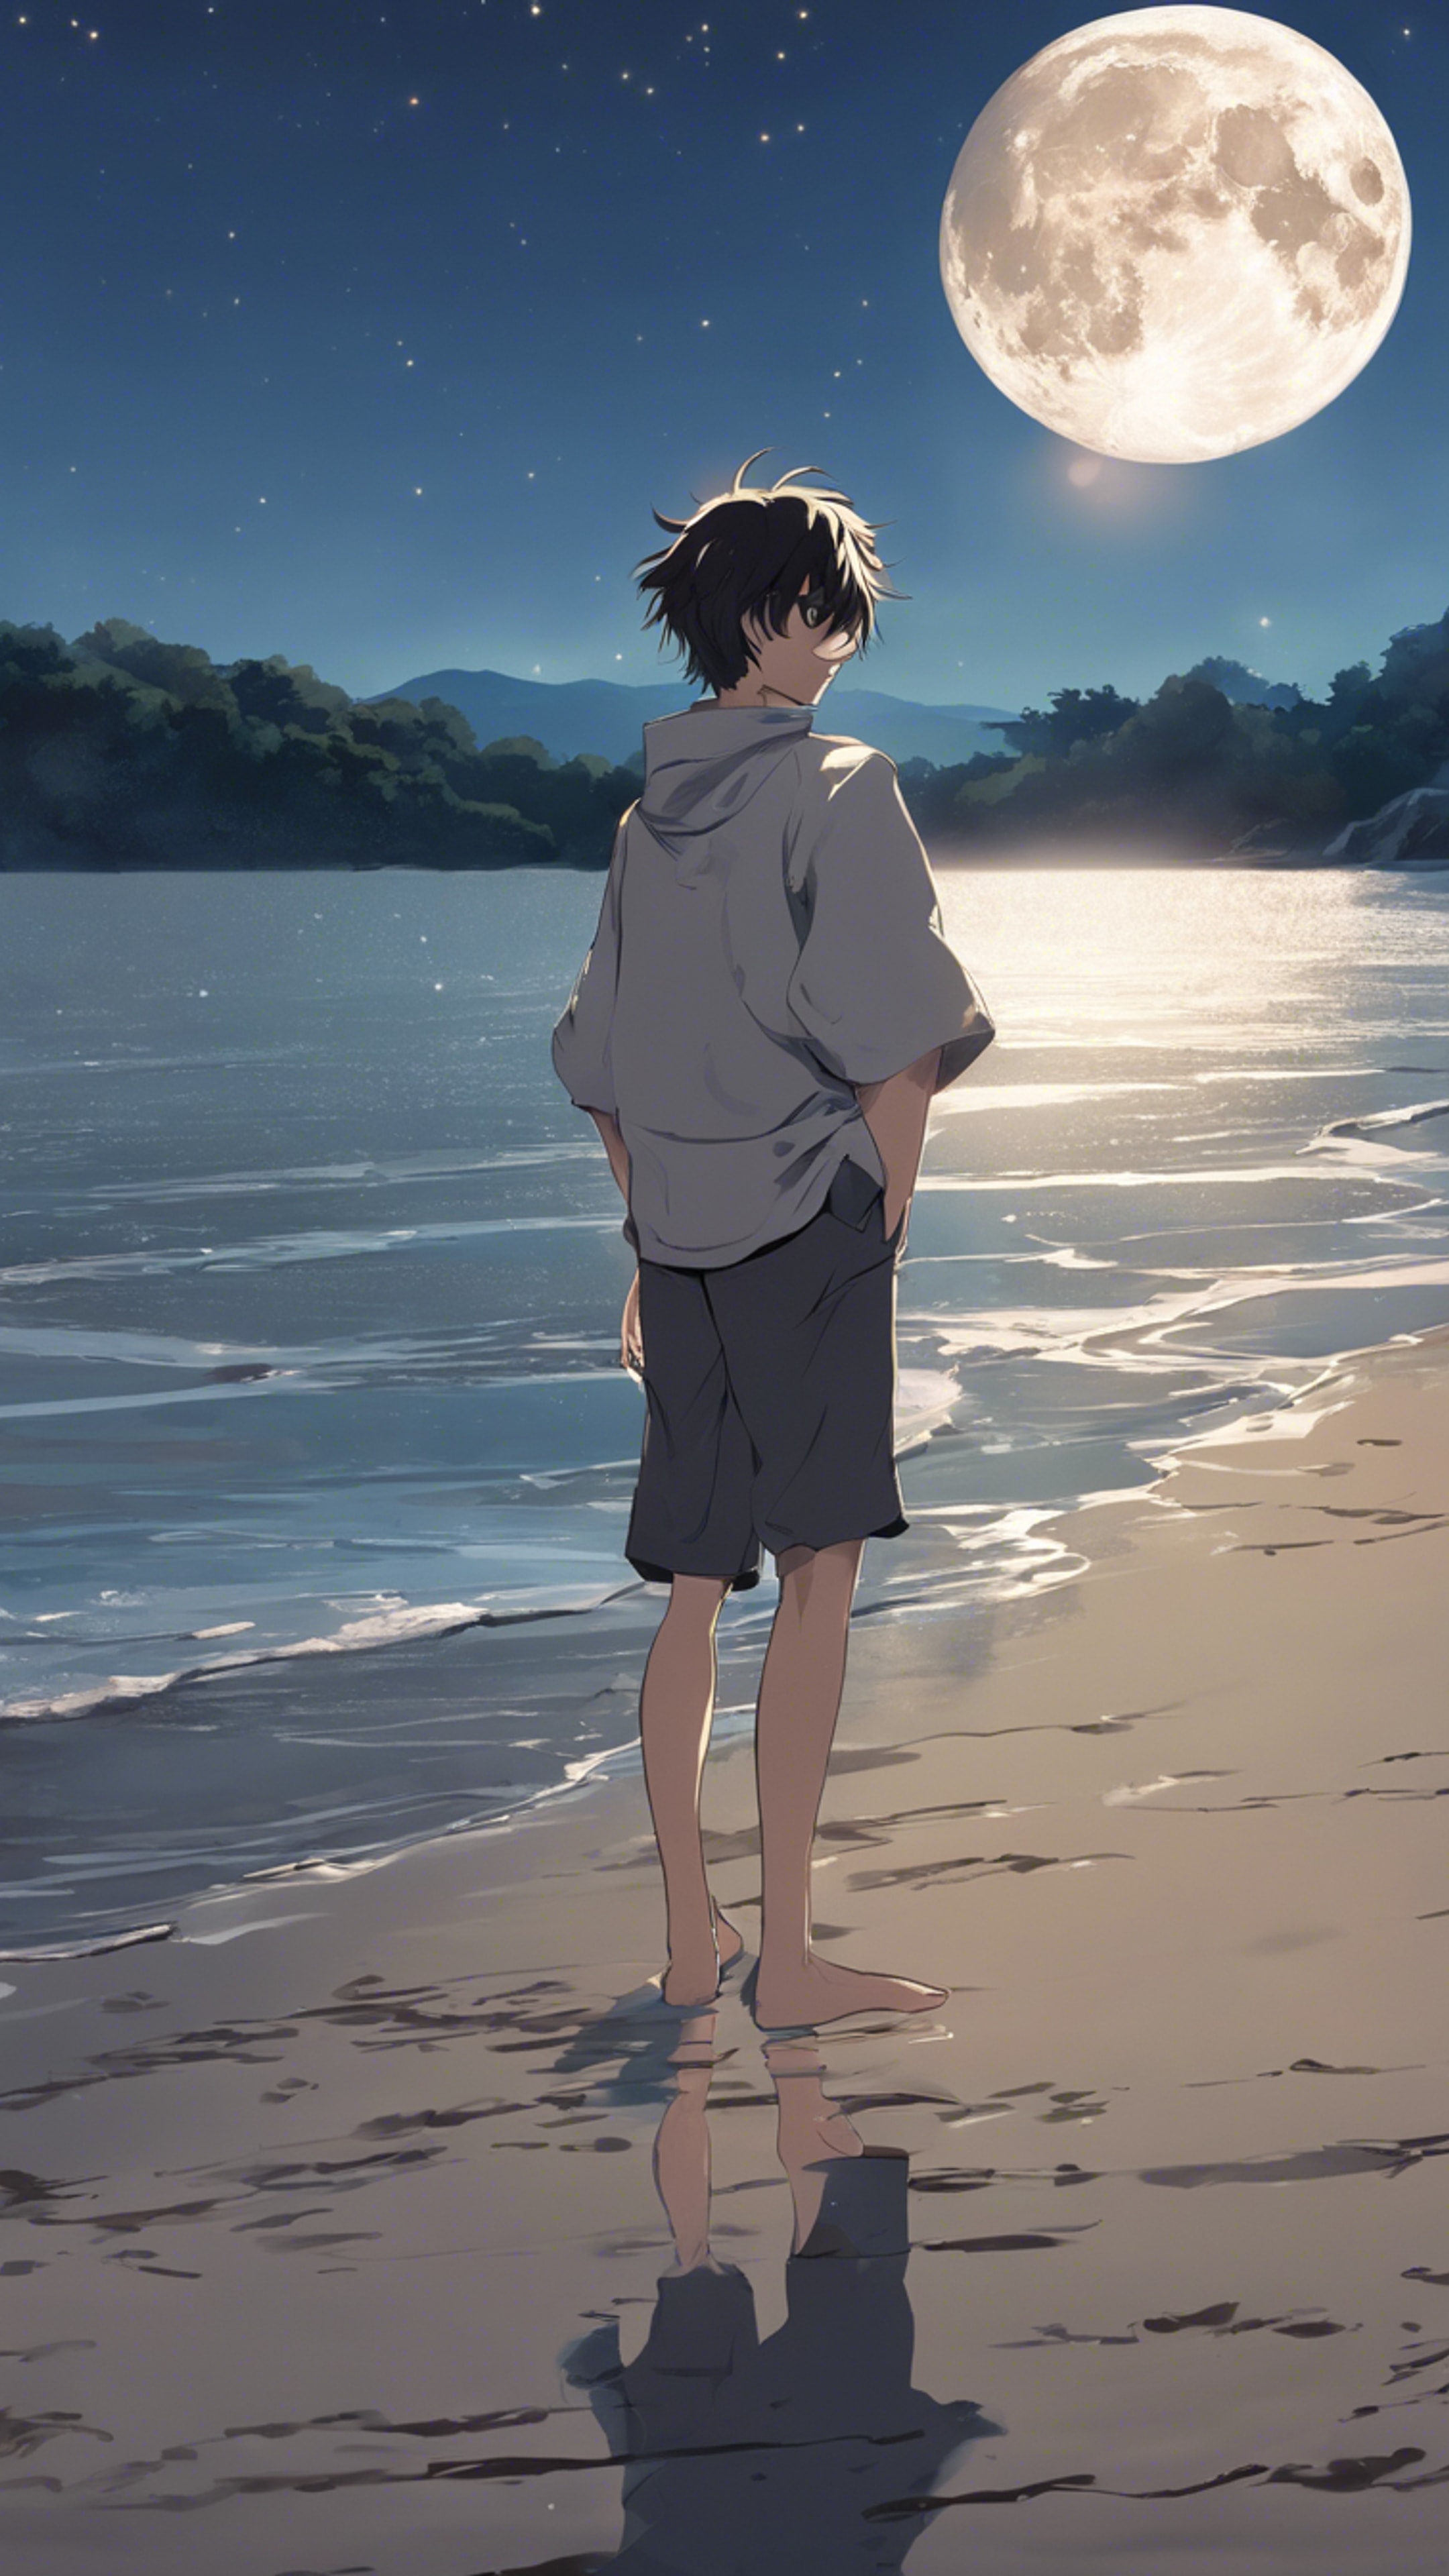 An anime boy standing barefoot on the shore, with the moon reflecting in upturned, joyous eyes. Tapeta[a80f9c3e465041ad9759]